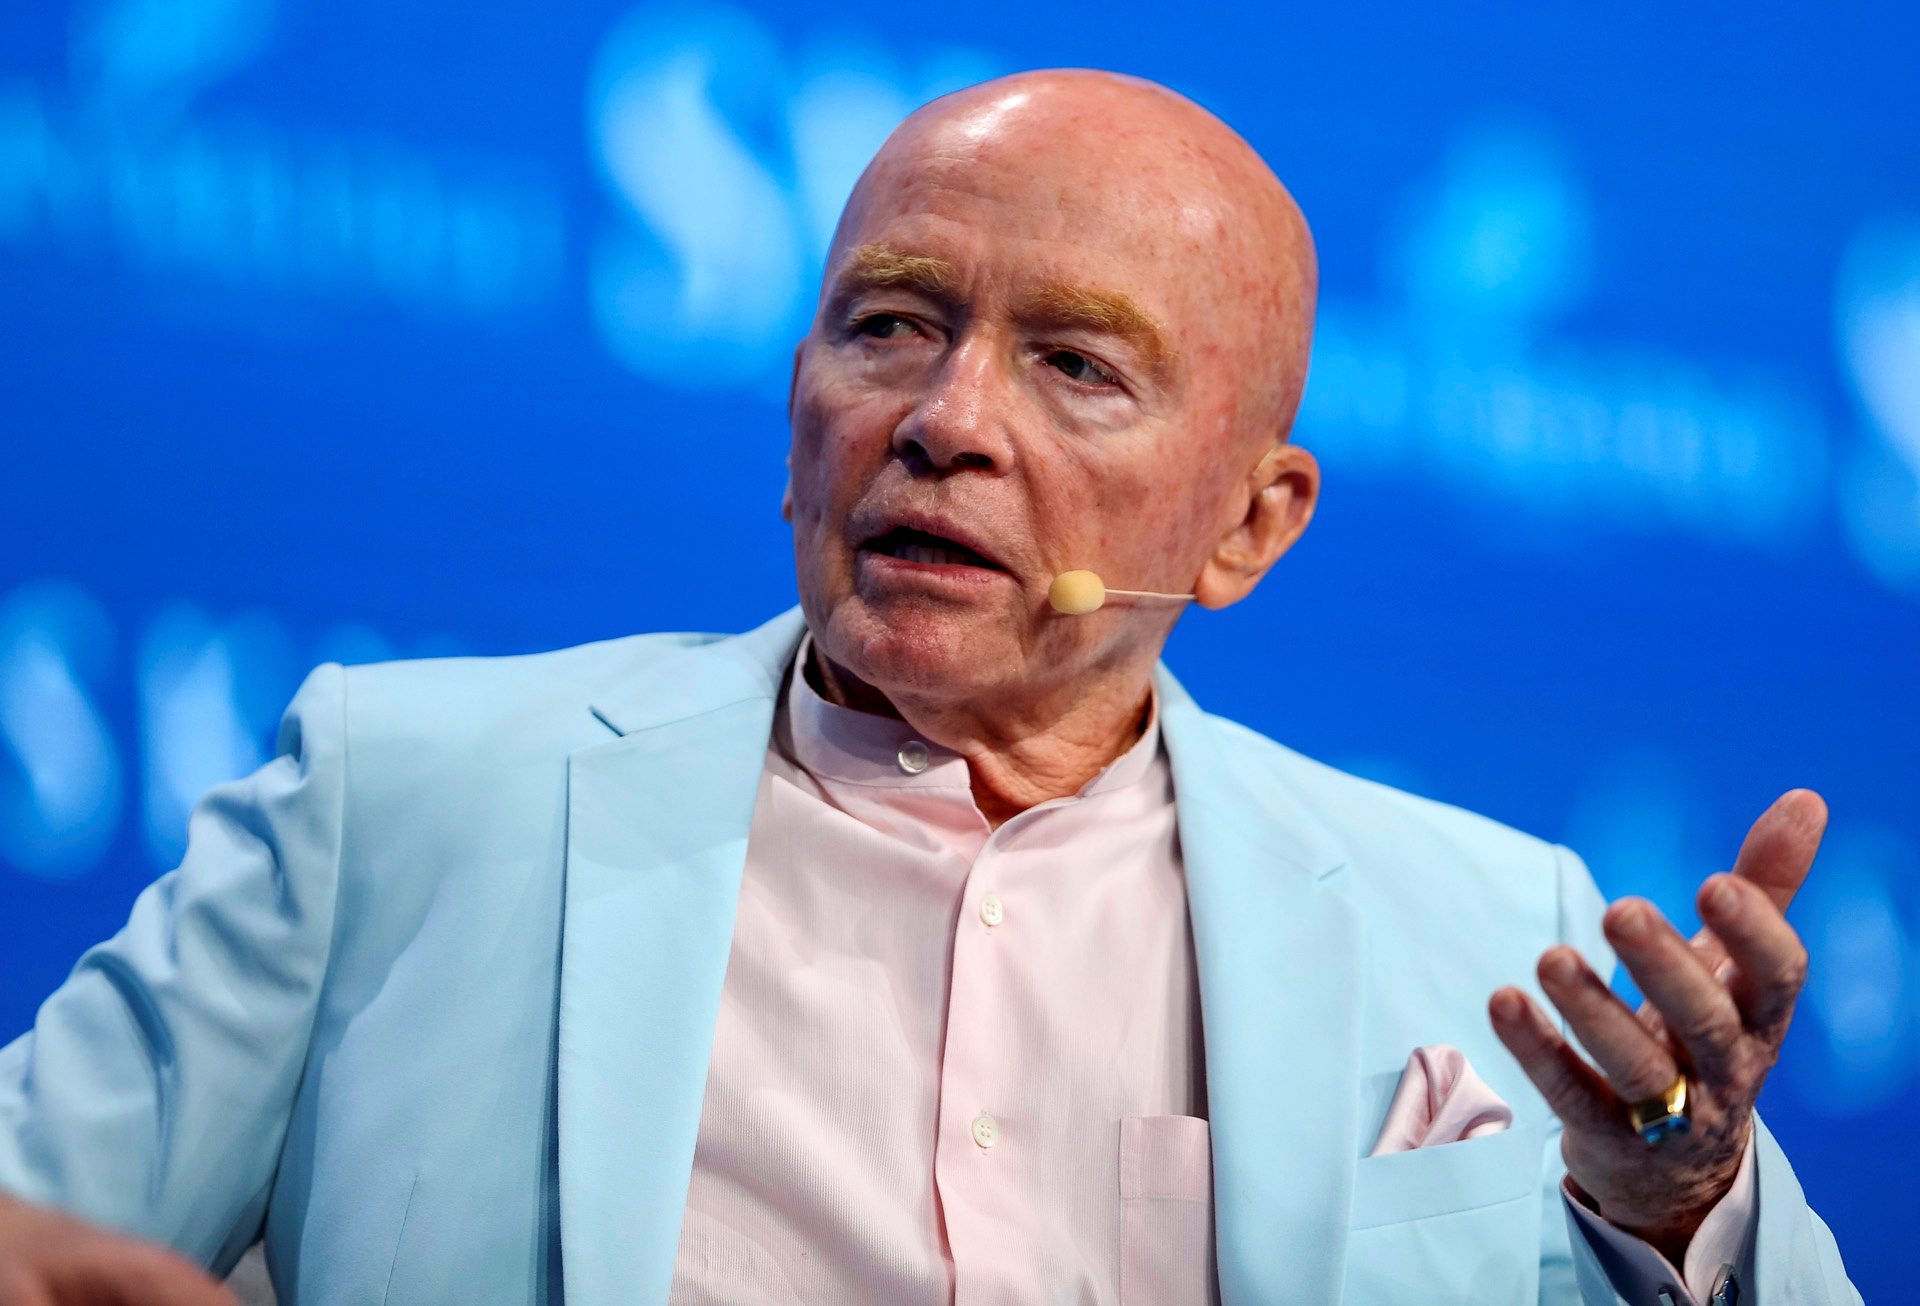 Mark Mobius, executive chairman at Templeton Emerging Markets Group, speaks during the SALT conference in Las Vegas